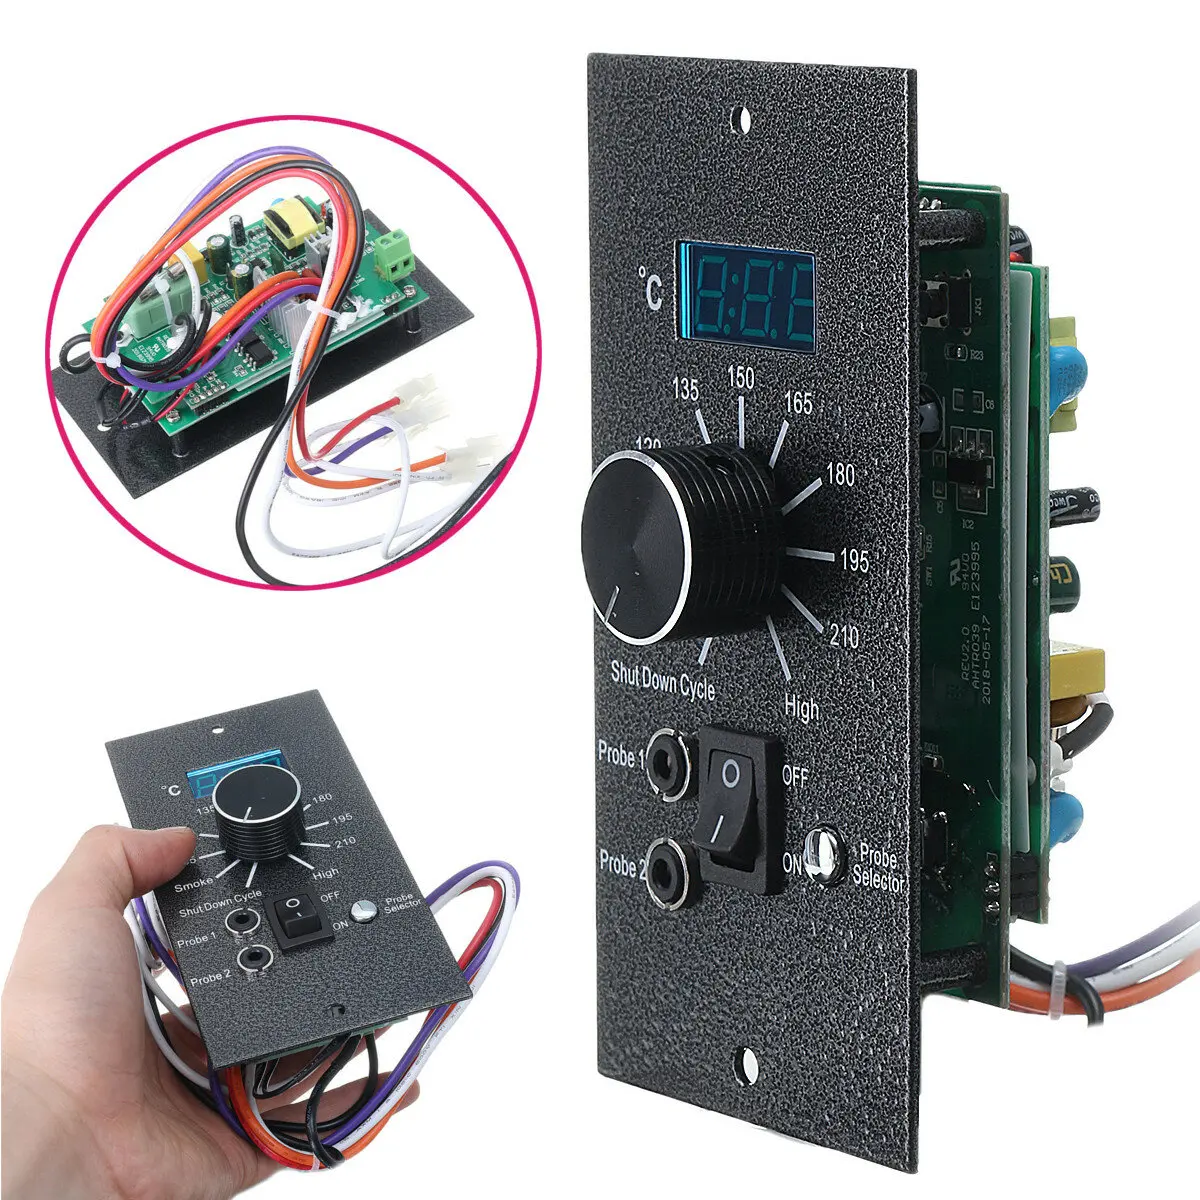 

230V AH-039-C Digital Thermometer Thermostat Upgrade Controller Board Replacement For Traeger Pellet Grill